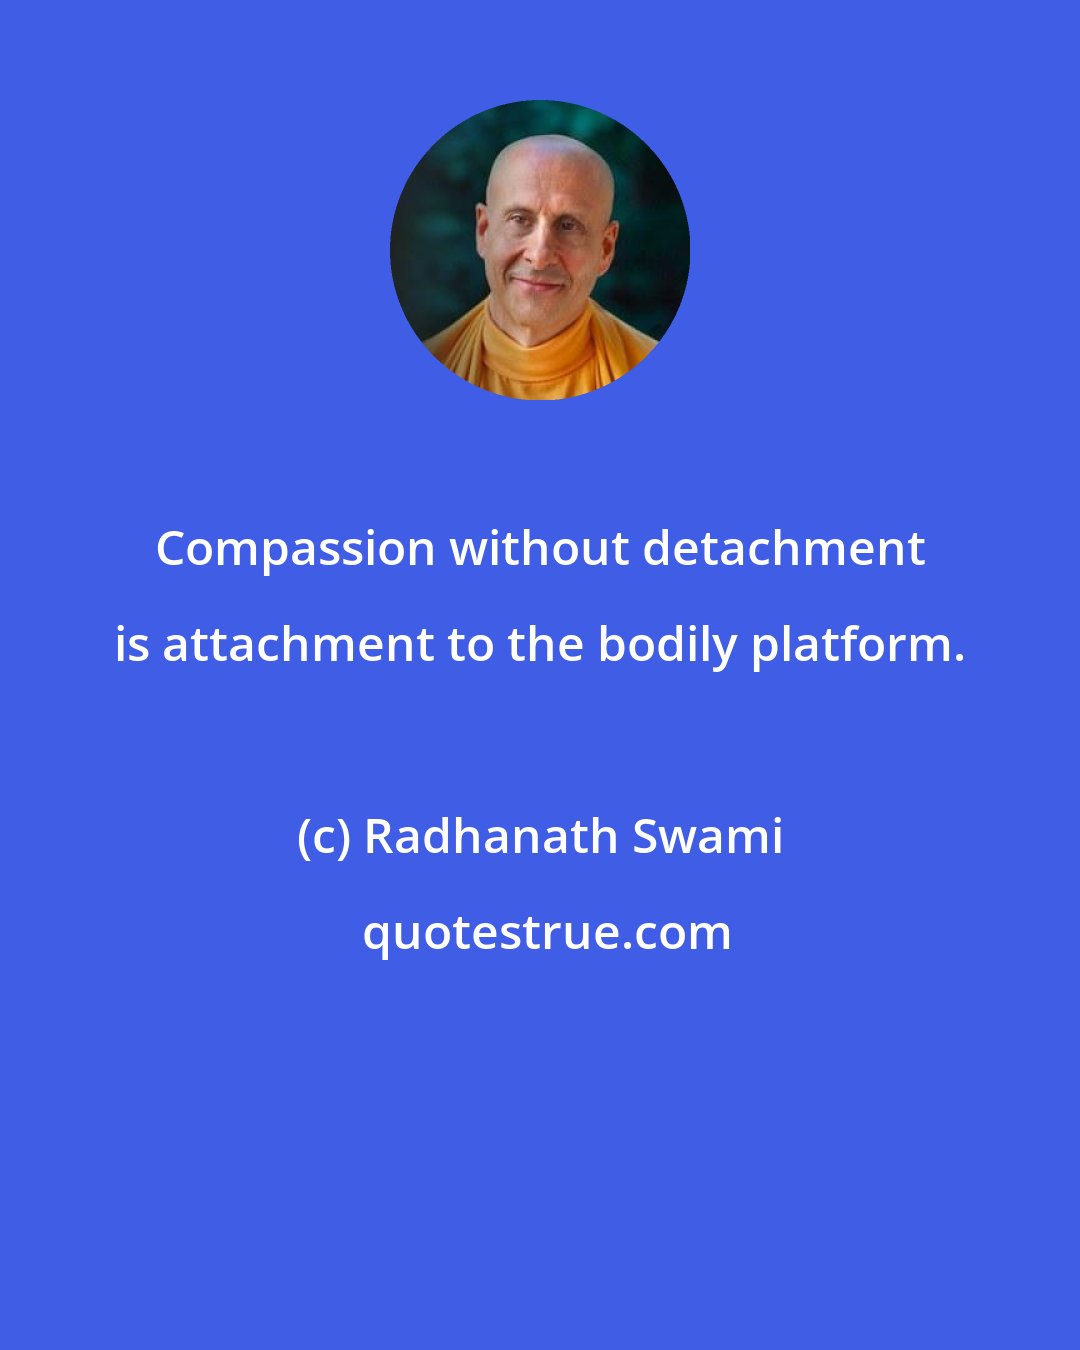 Radhanath Swami: Compassion without detachment is attachment to the bodily platform.